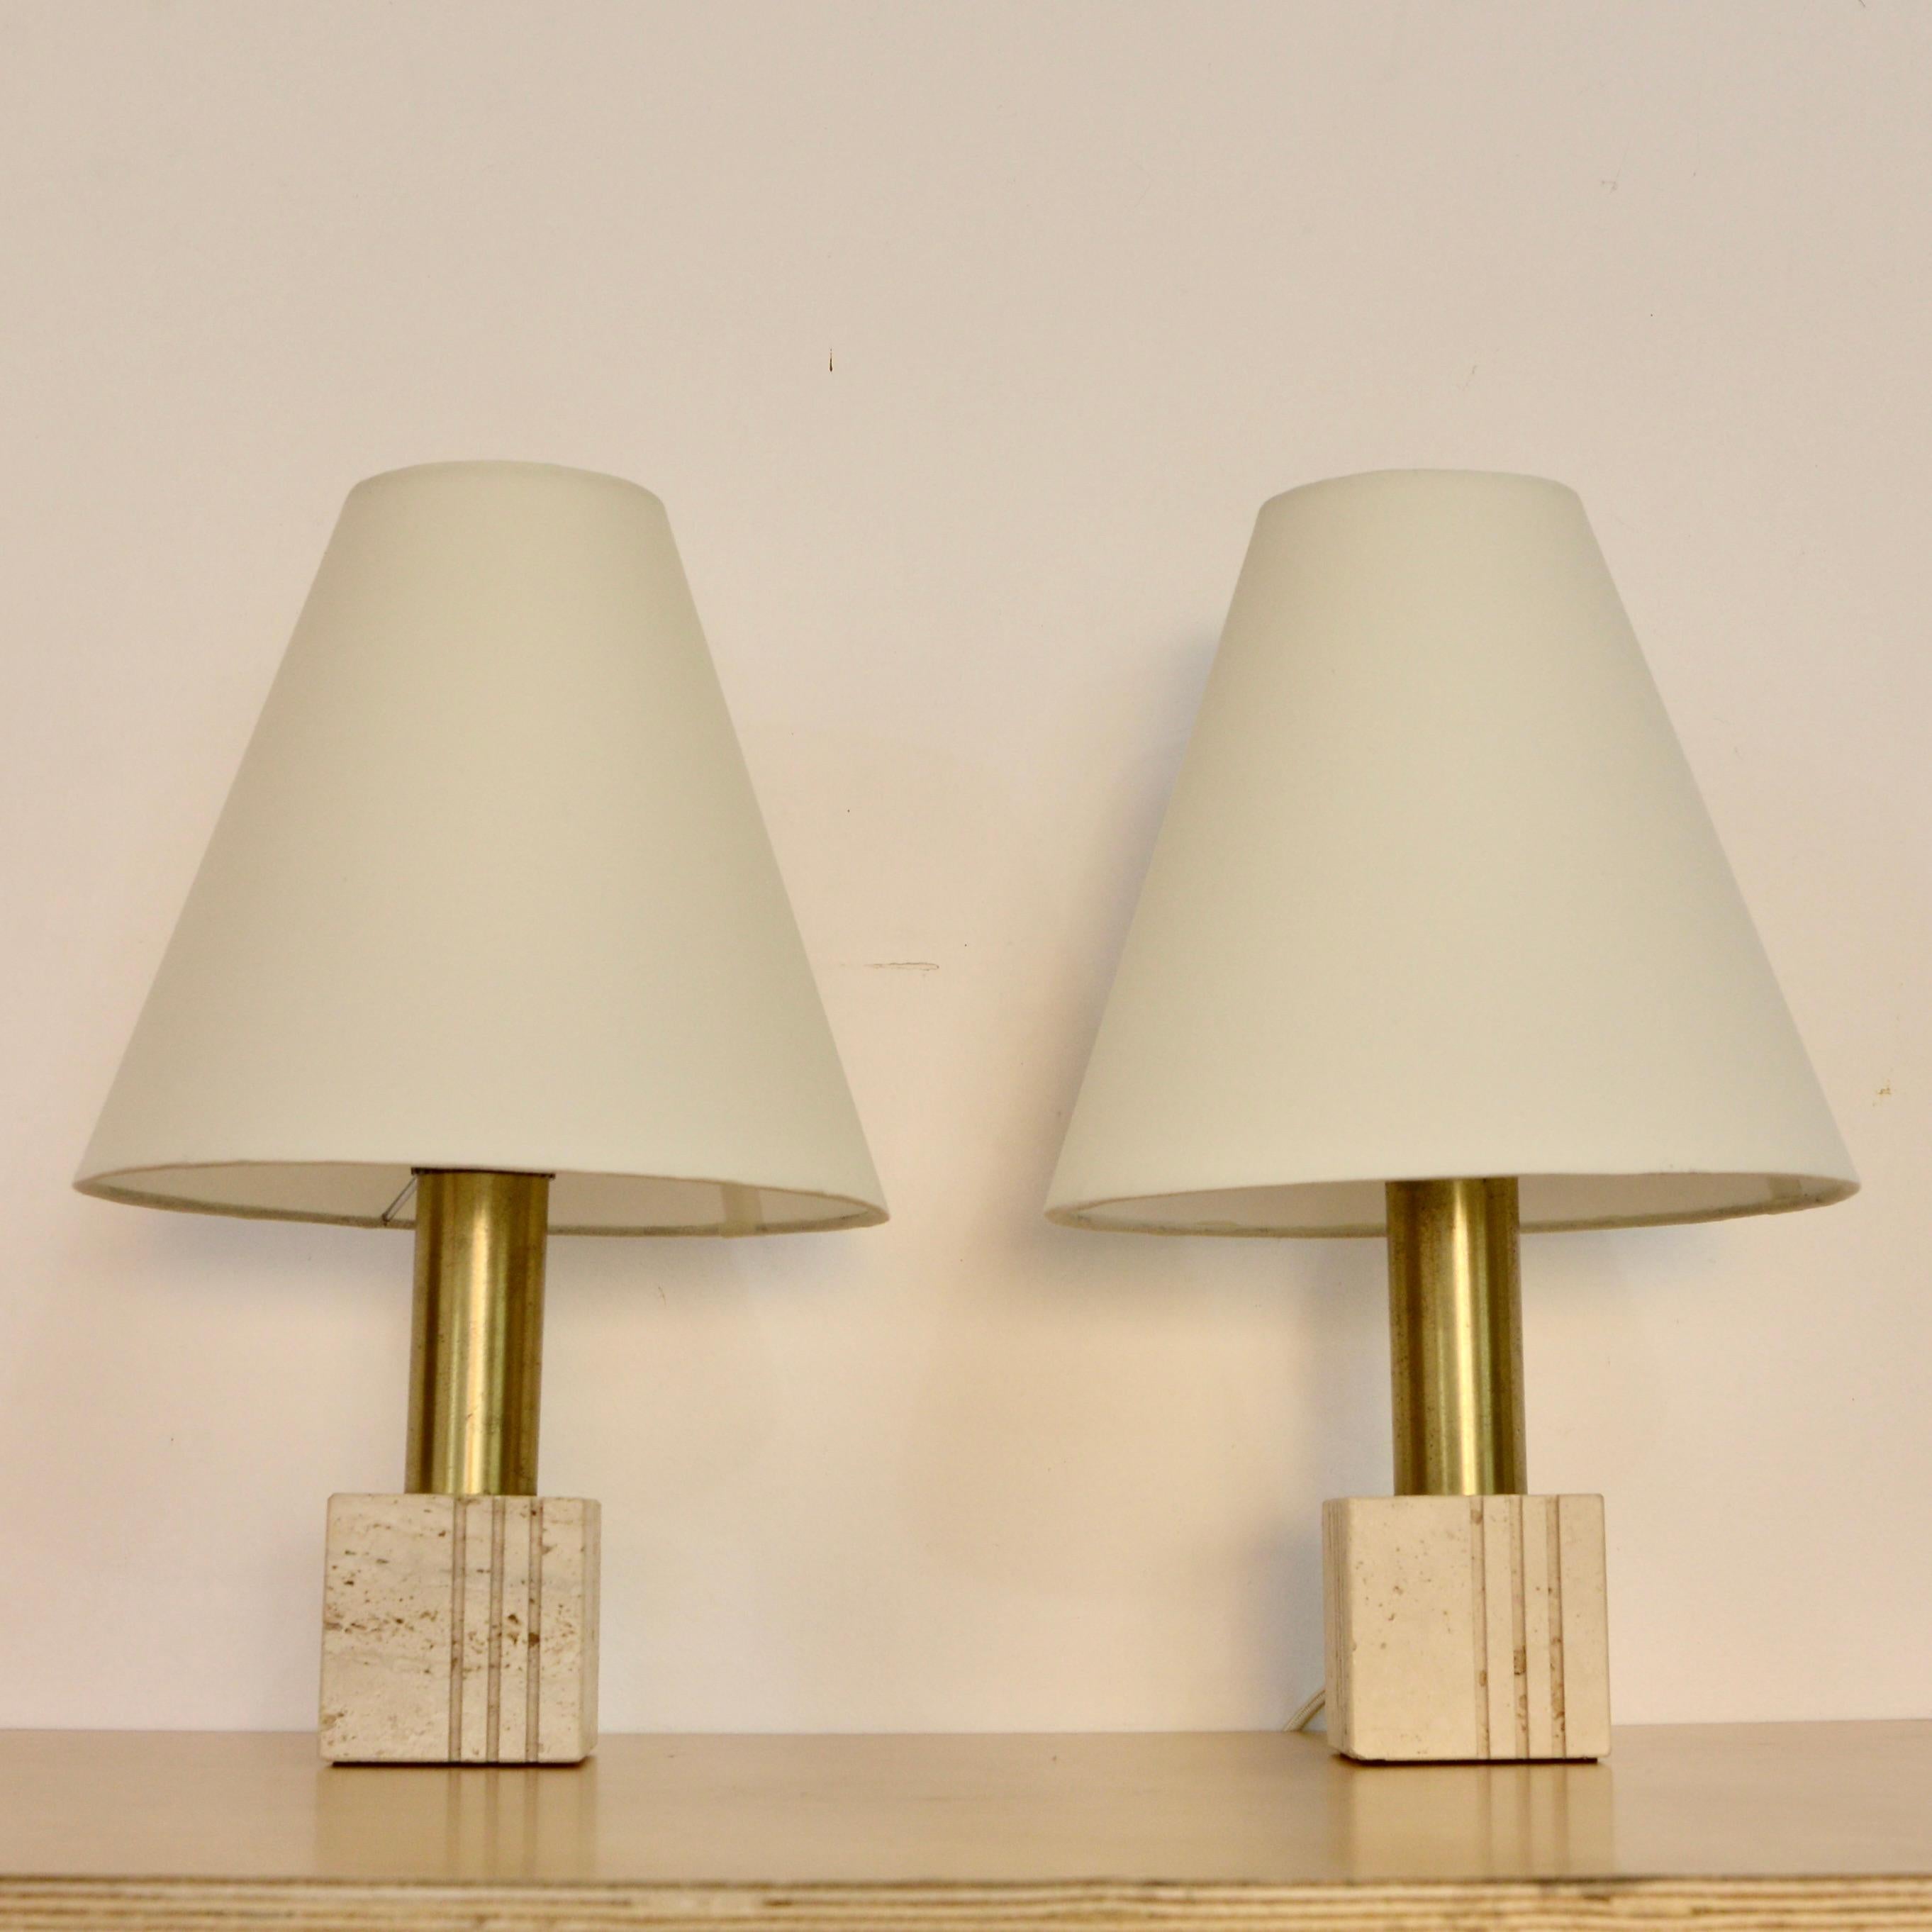 Vintage 1960s travertine Italian table lamps with brass stem, and fabric lamp shade. Fully rewired with a single E26 medium based sockets, ready to be used in the USA. Sold as a pair, lightbulbs included with order. 
Measurements:
Height: